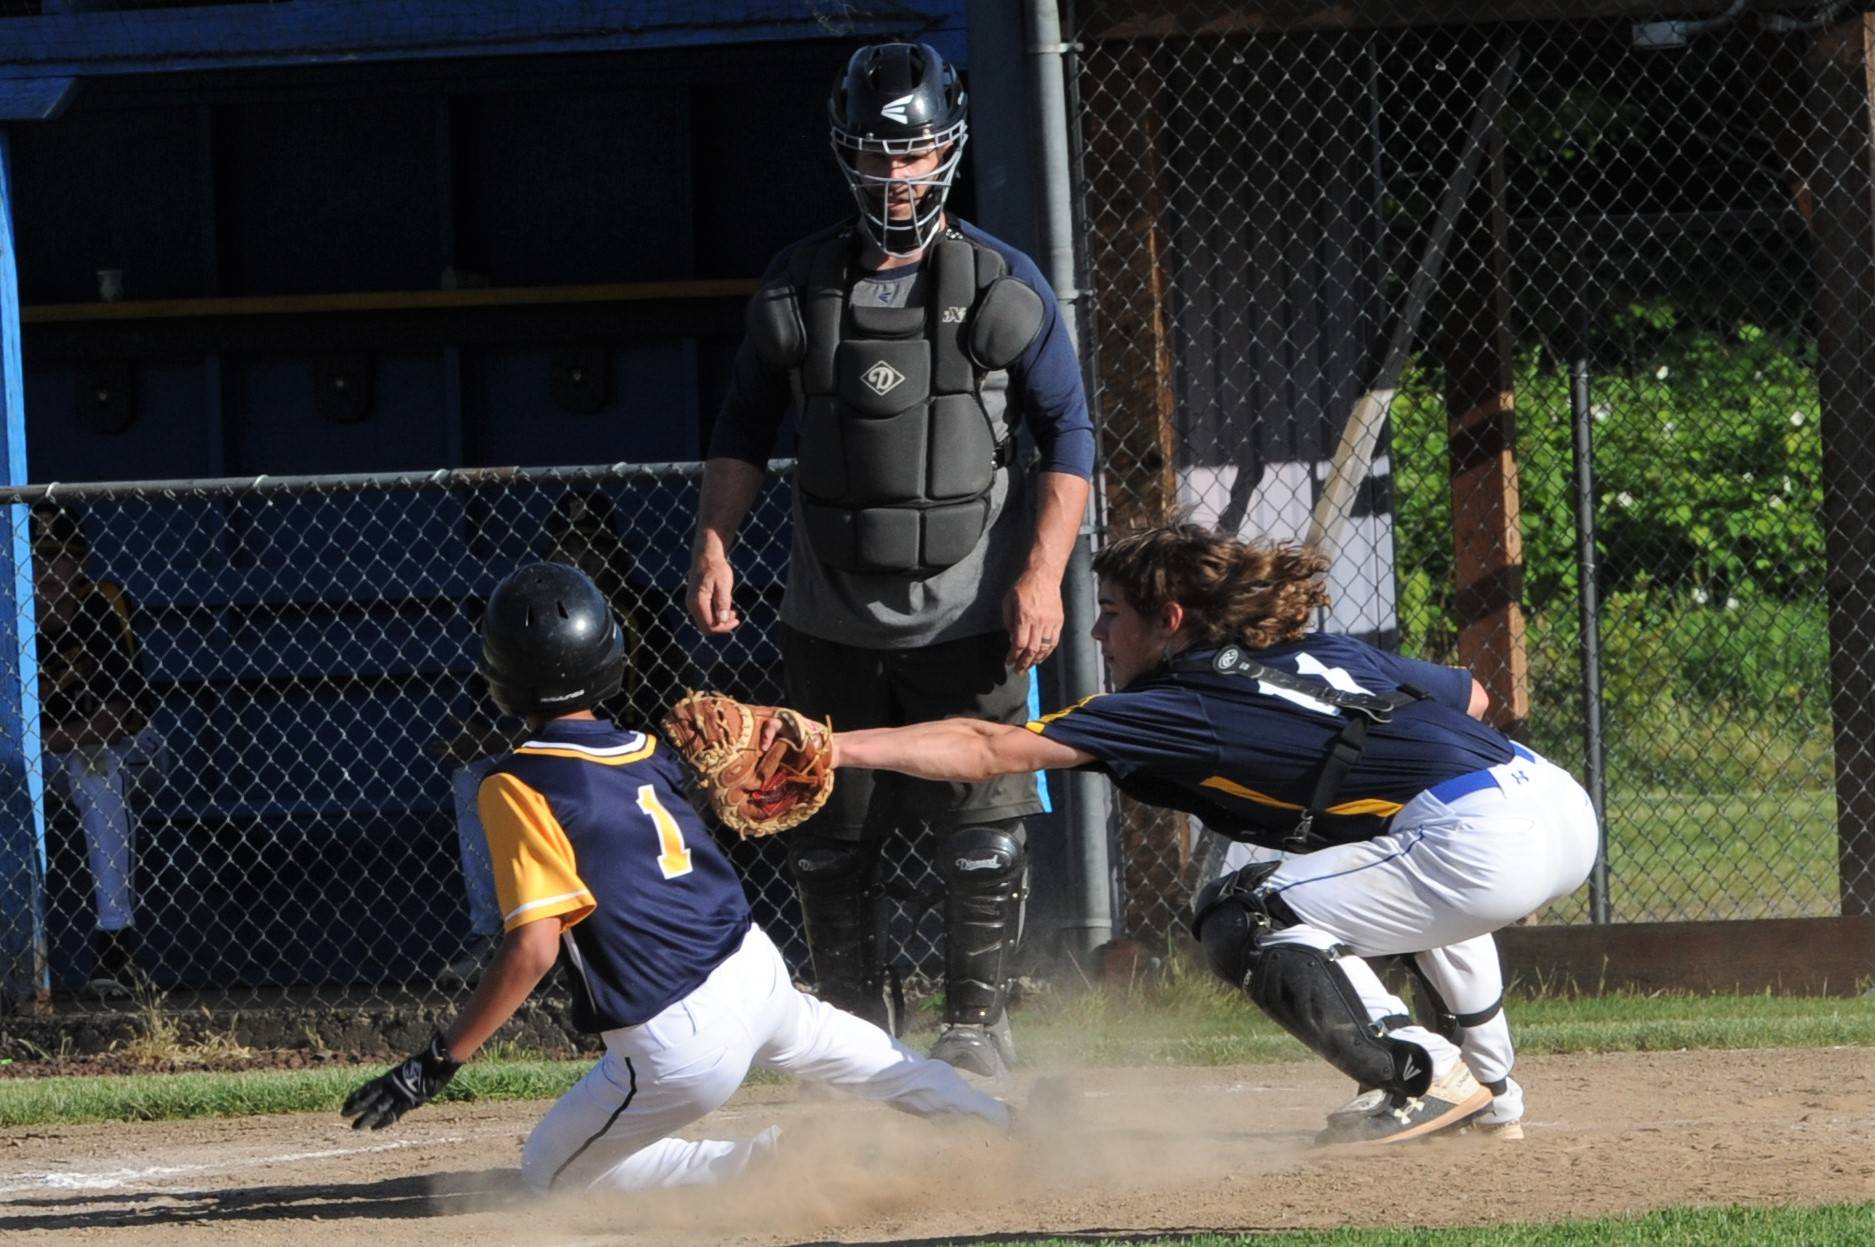 Forks’ runner Noah Foster (1) was tagged out at home by Beaver catcher Walker Wheeler. Umpiring is Carl Windle. Photo by Lonnie Archibald